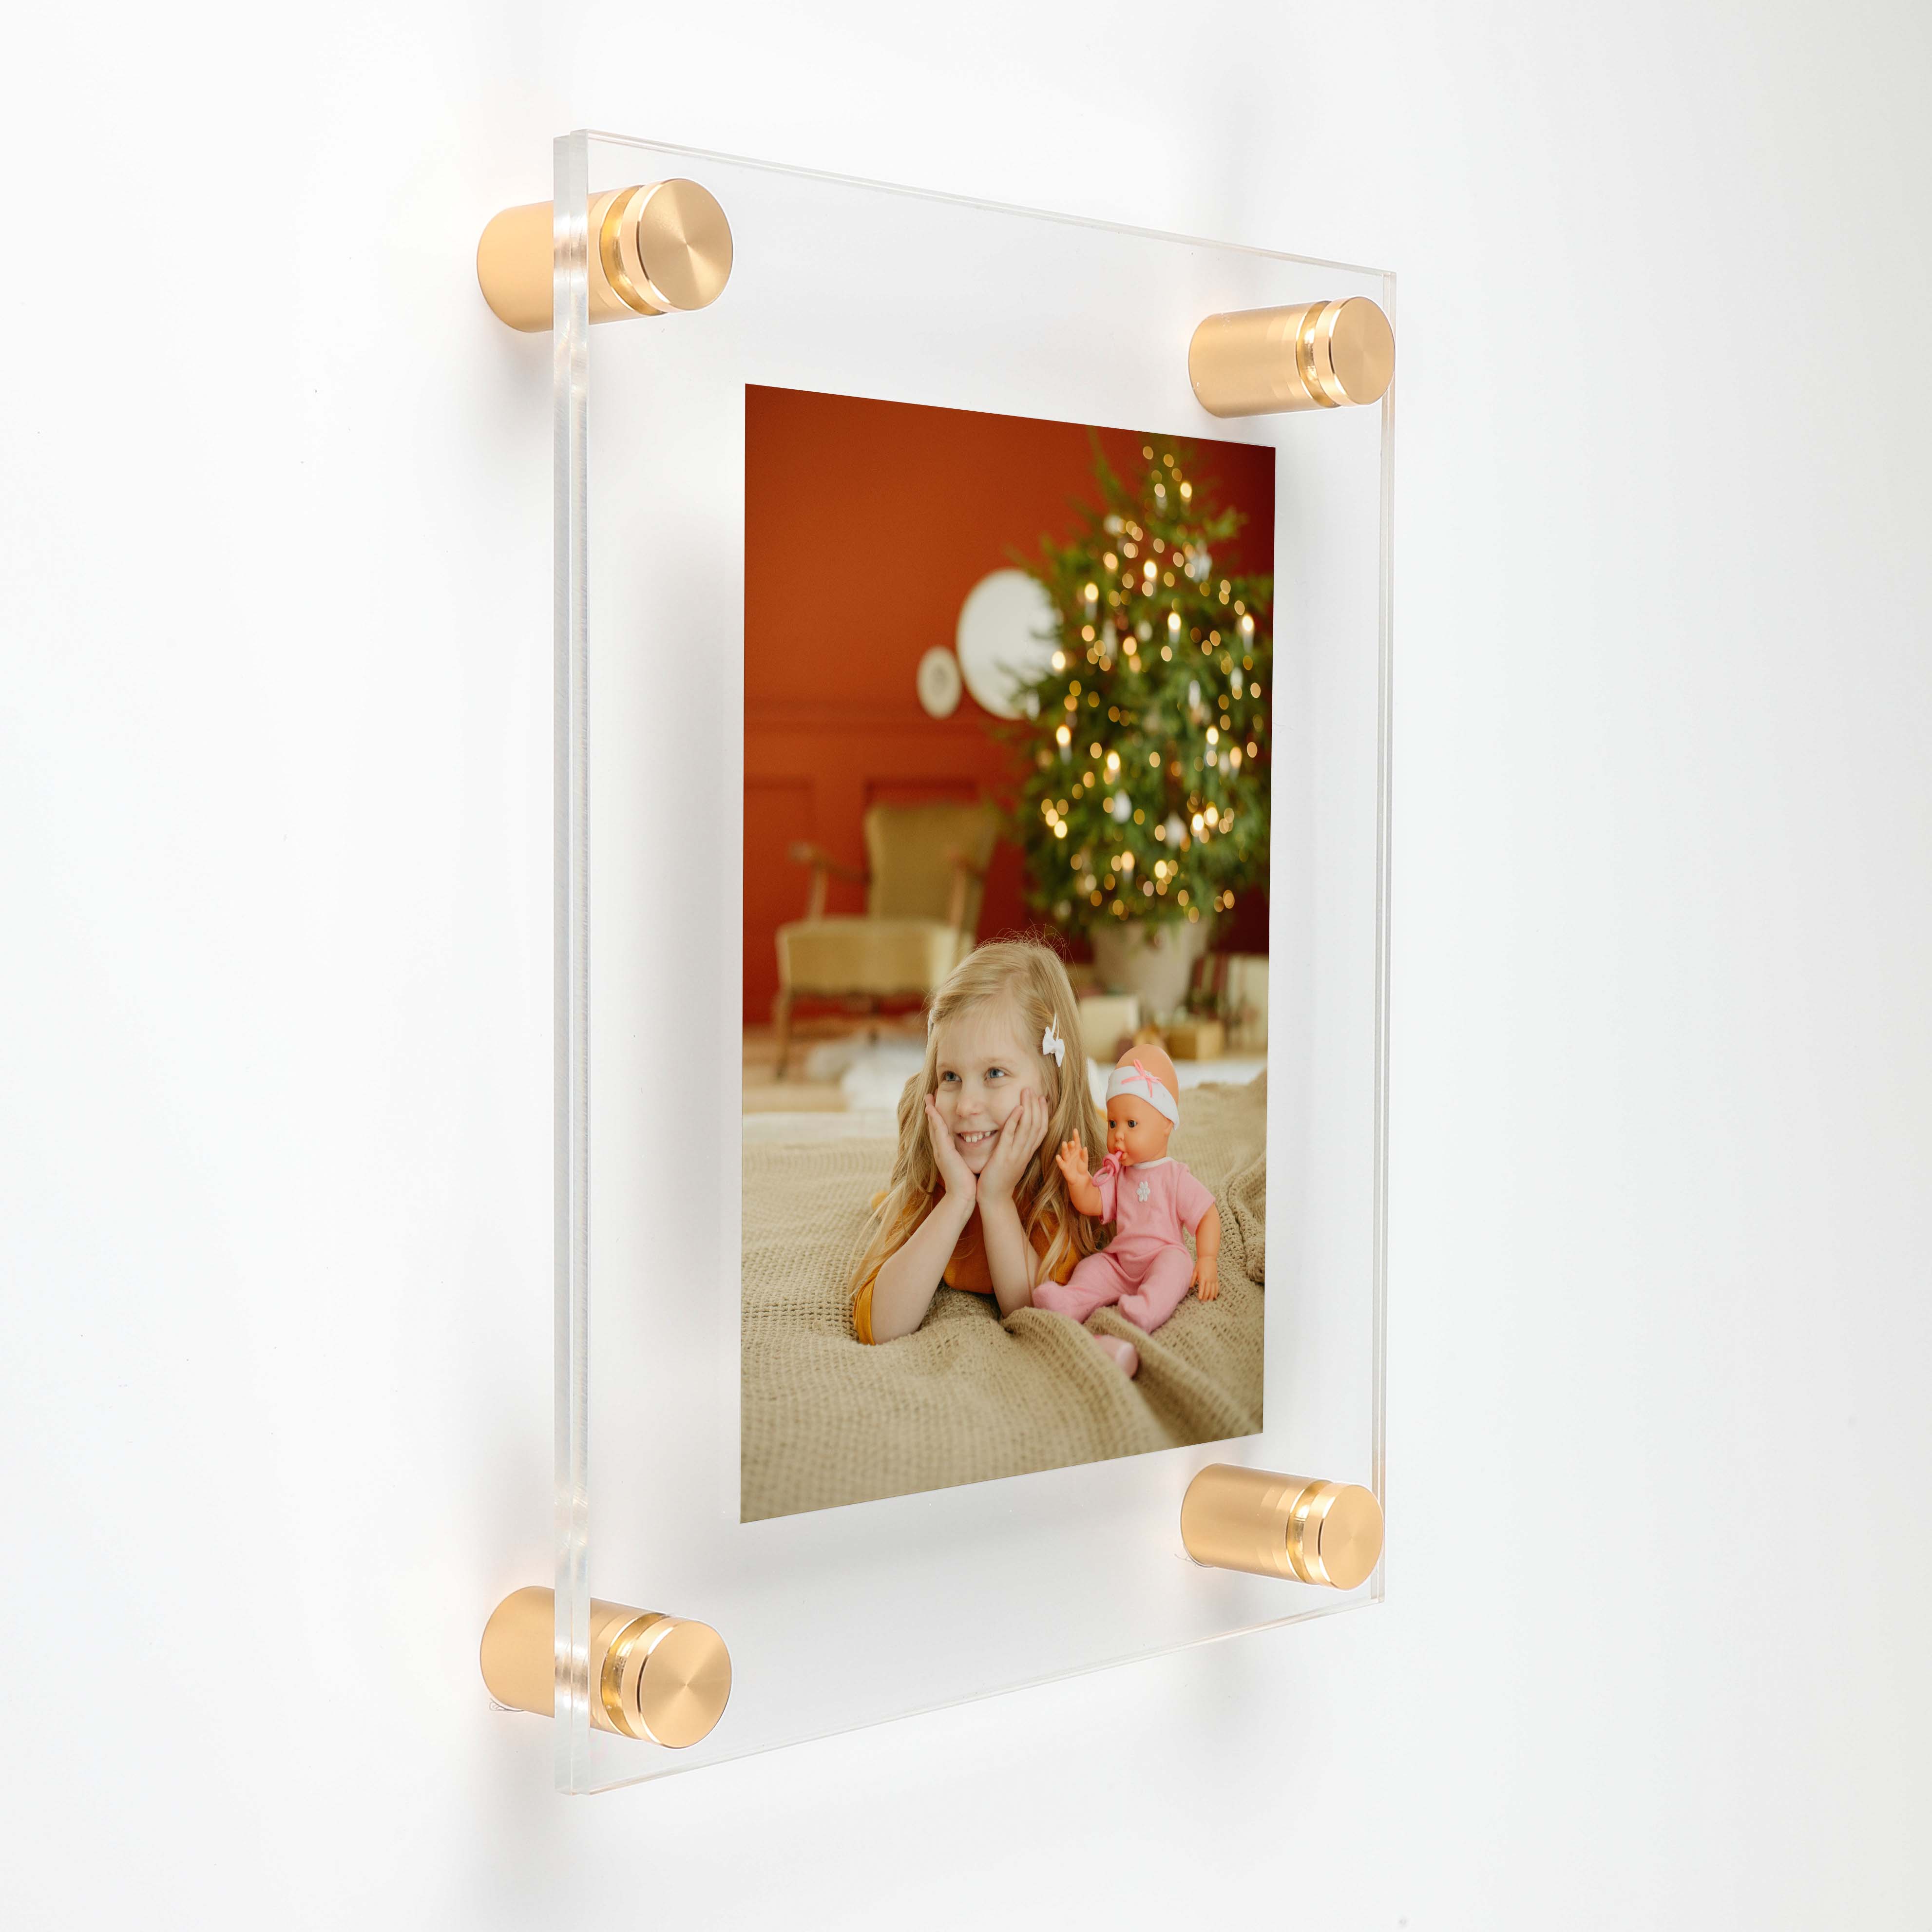 (2) 27'' x 39'' Clear Acrylics , Pre-Drilled With Polished Edges (Thick 3/16'' each), Wall Frame with (6) 1'' x 1'' Champagne Anodized Aluminum Standoffs includes Screws and Anchors